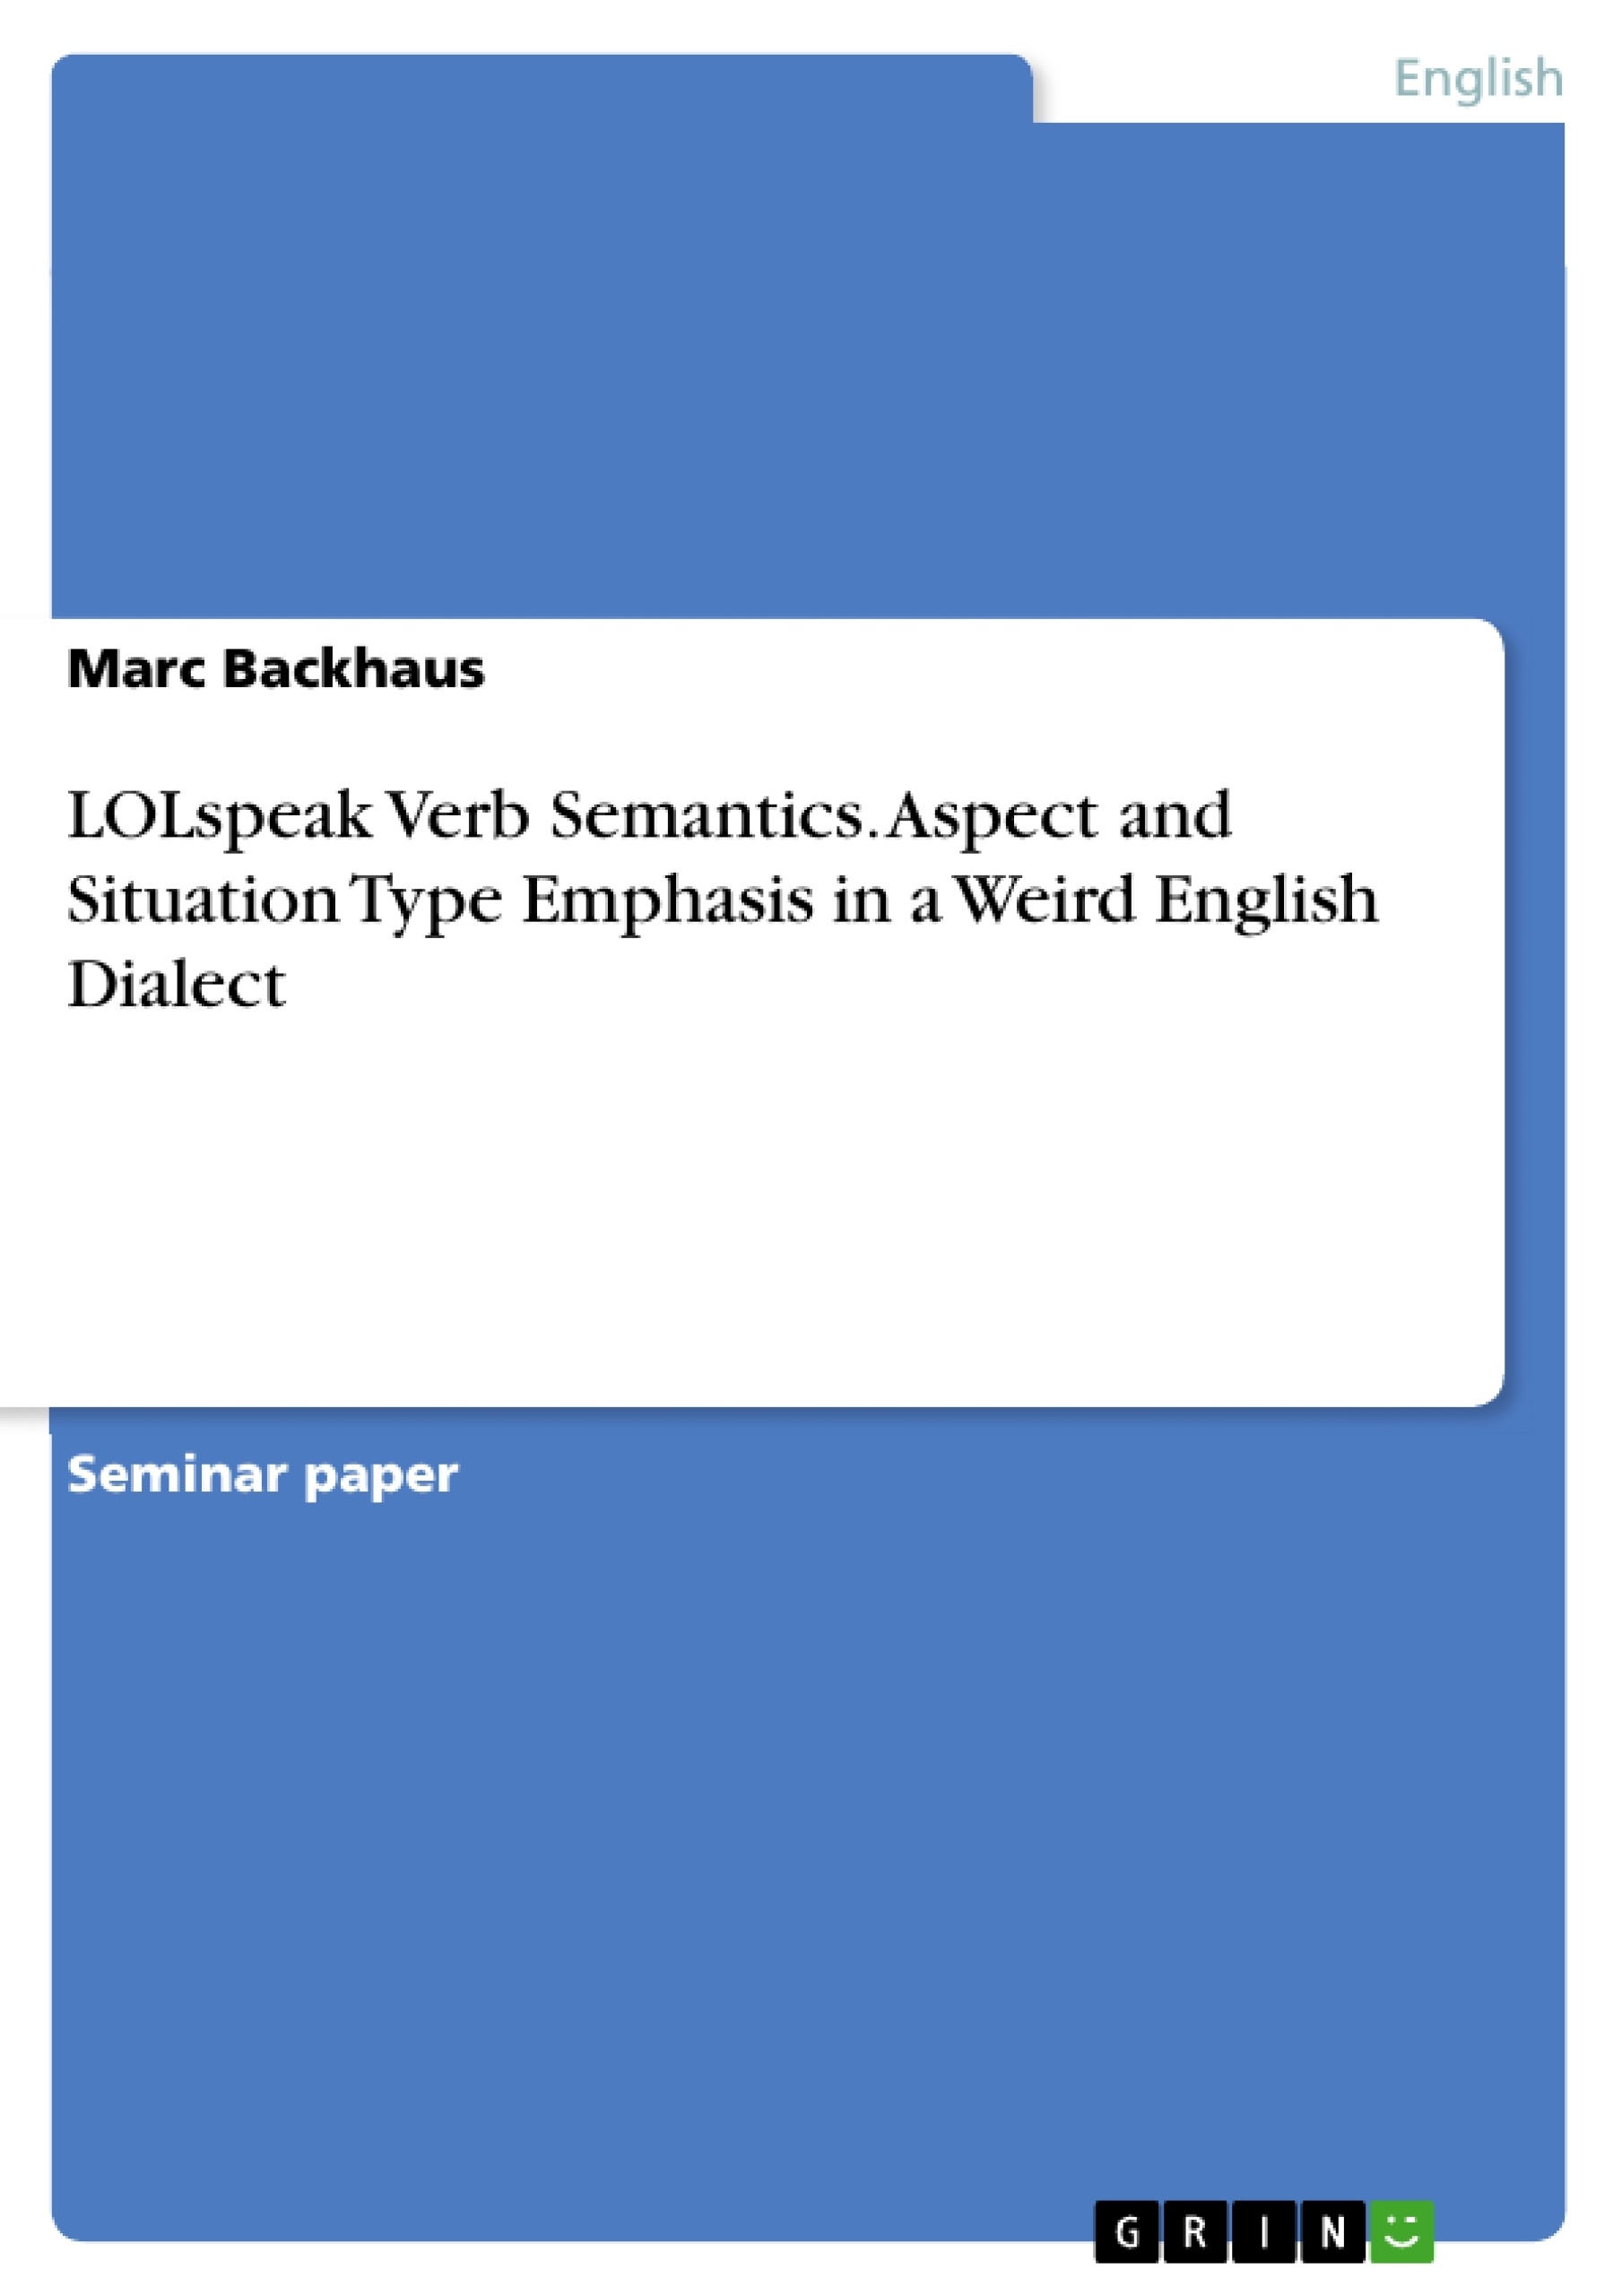 Title: LOLspeak Verb Semantics. Aspect and Situation Type Emphasis in a Weird English Dialect